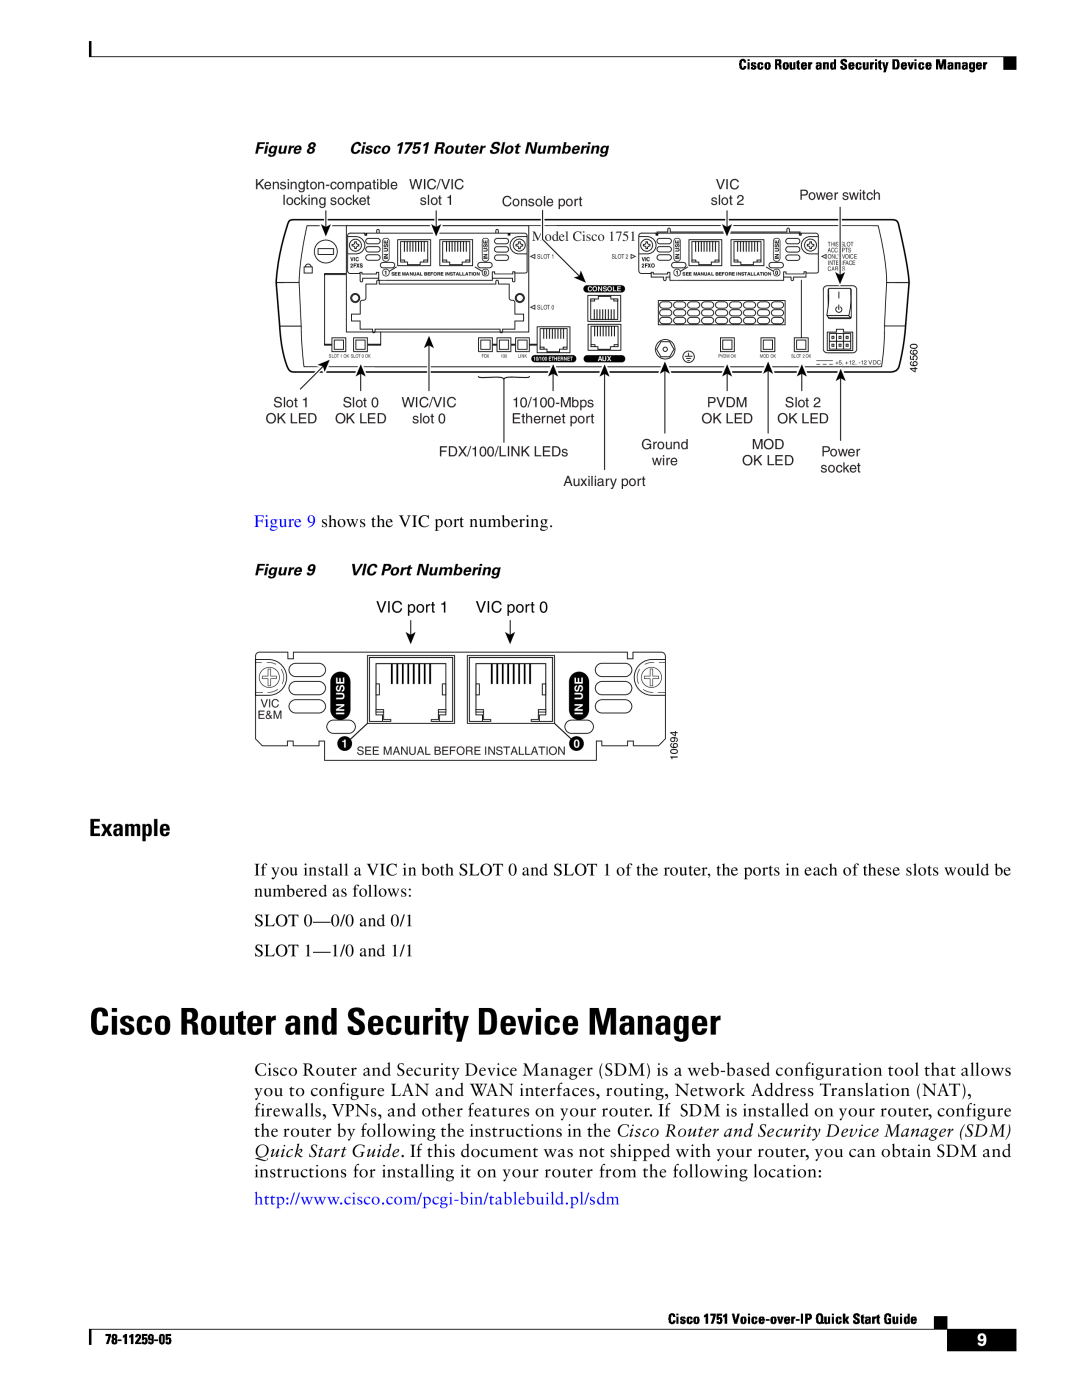 Cisco Systems CISCO1751 quick start Cisco Router and Security Device Manager, Example 